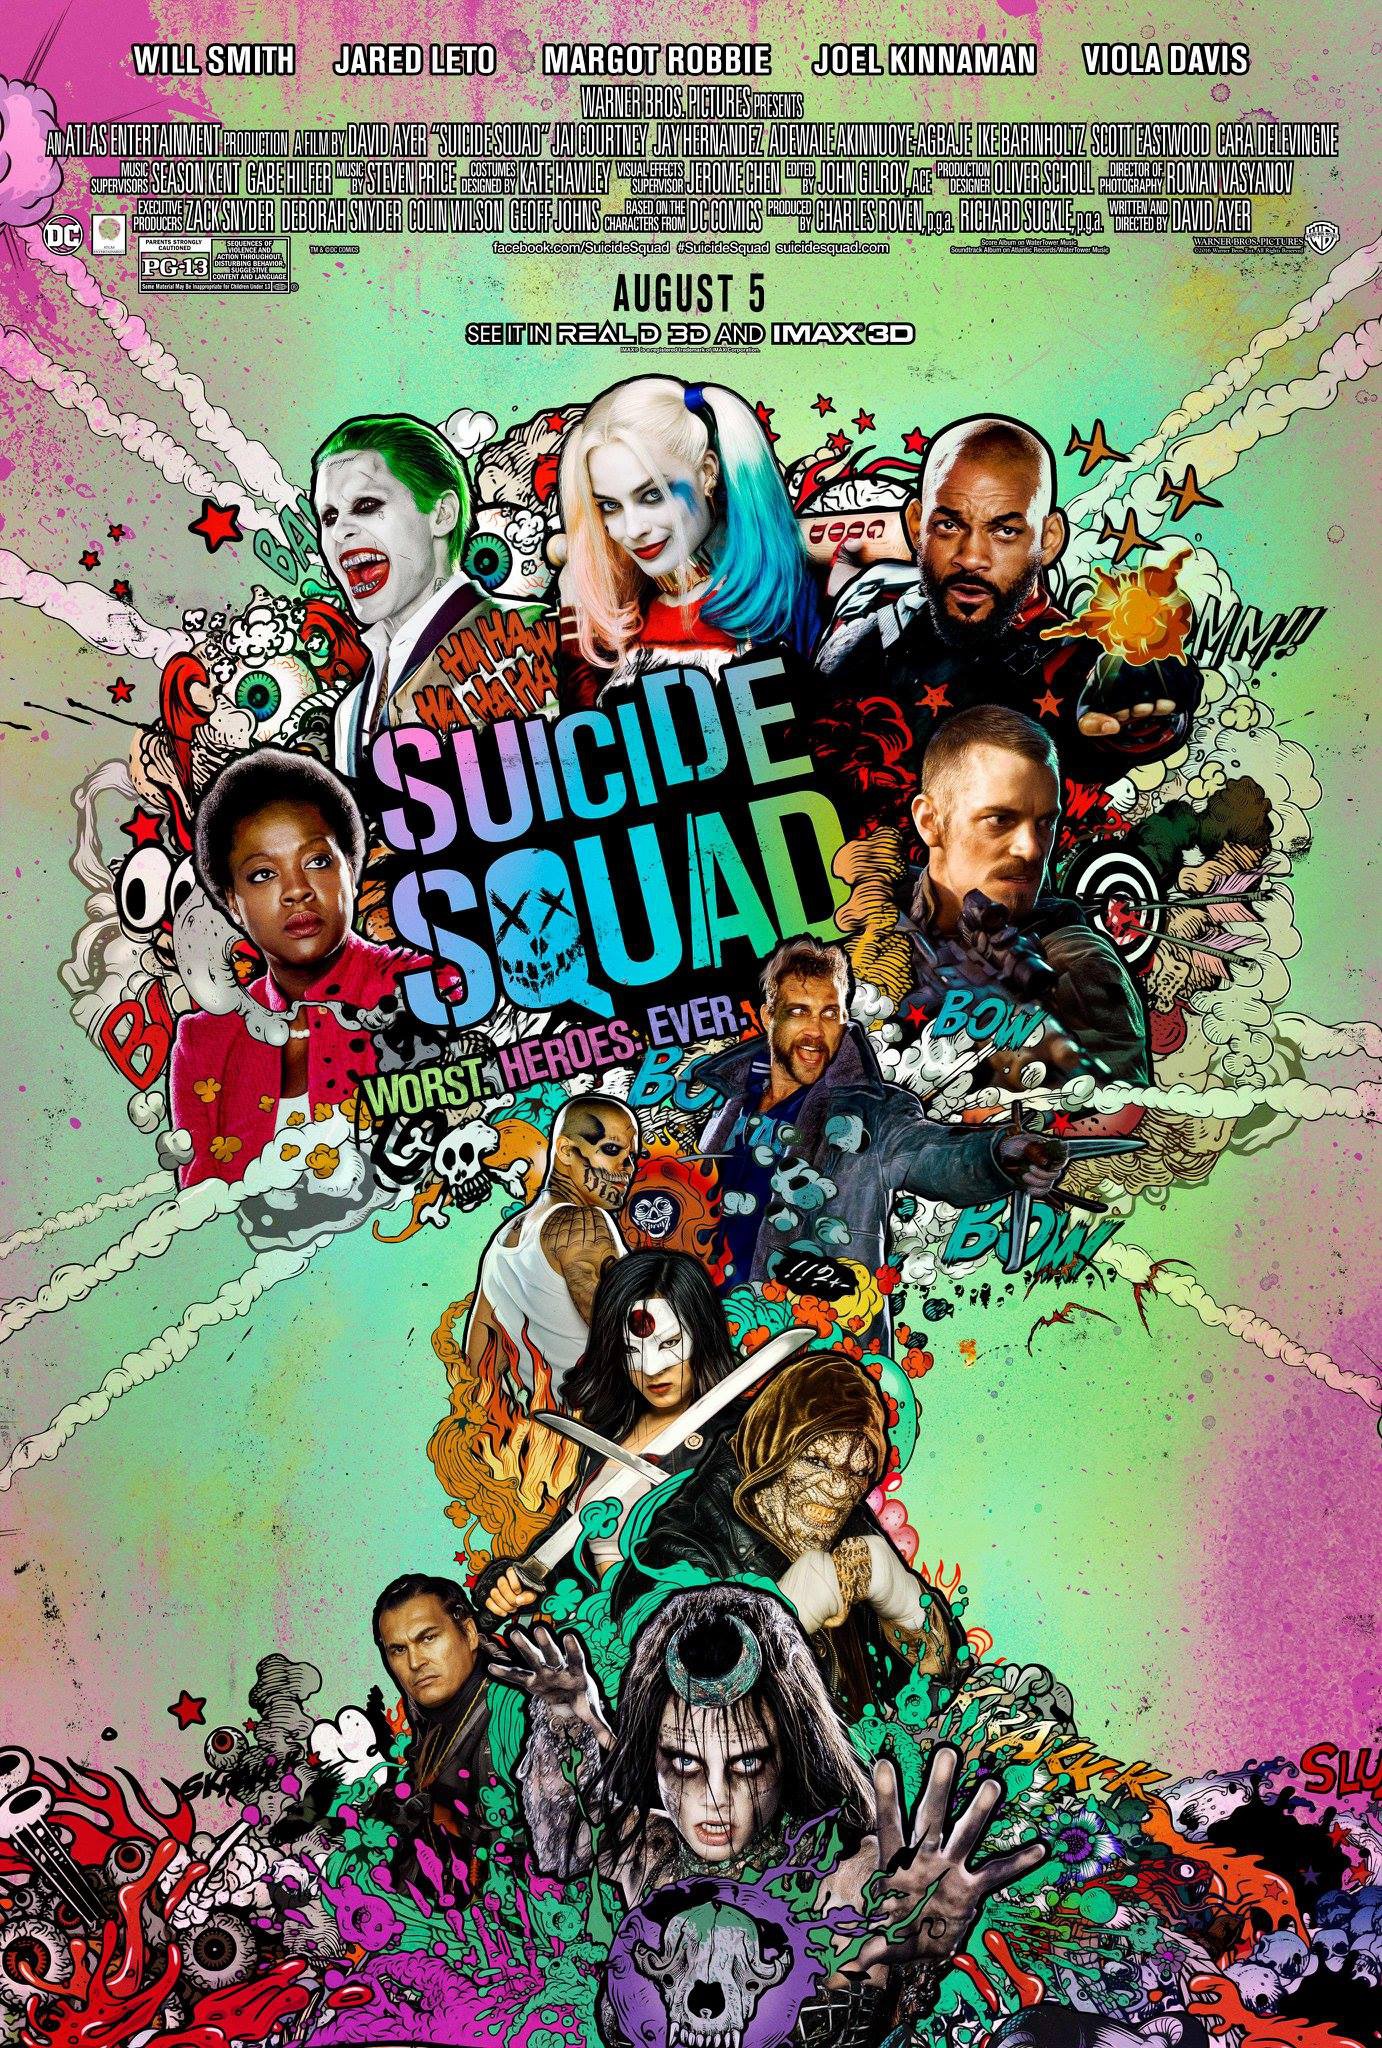 Mega Sized Movie Poster Image for Suicide Squad (#24 of 49)